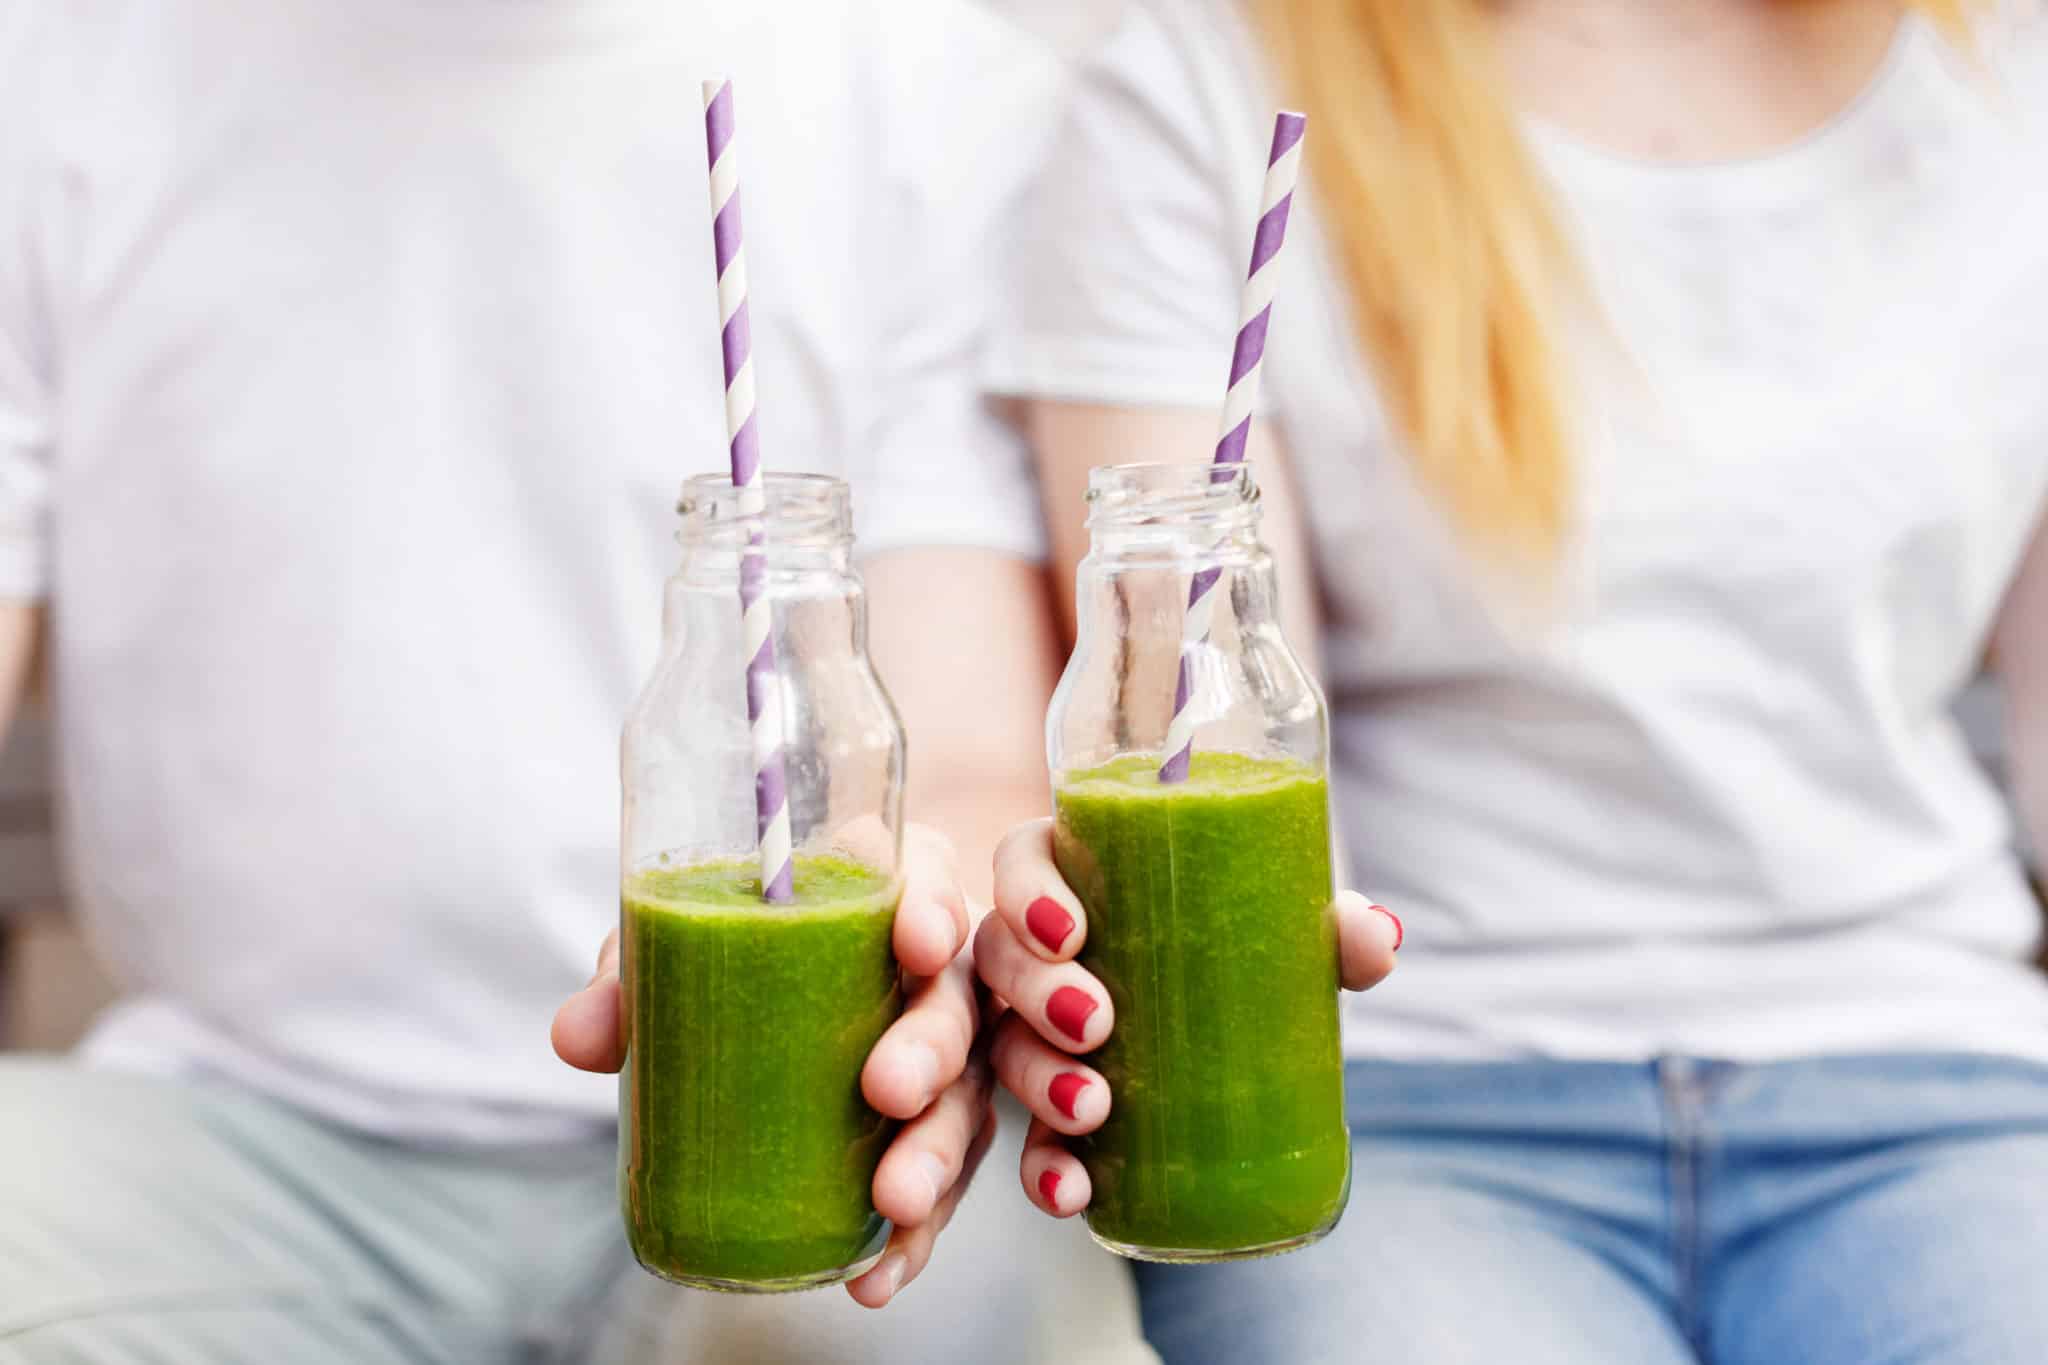 Two individuals in white t-shirts and jeans holding two clear bottles of green juice with white and pink striped straws.